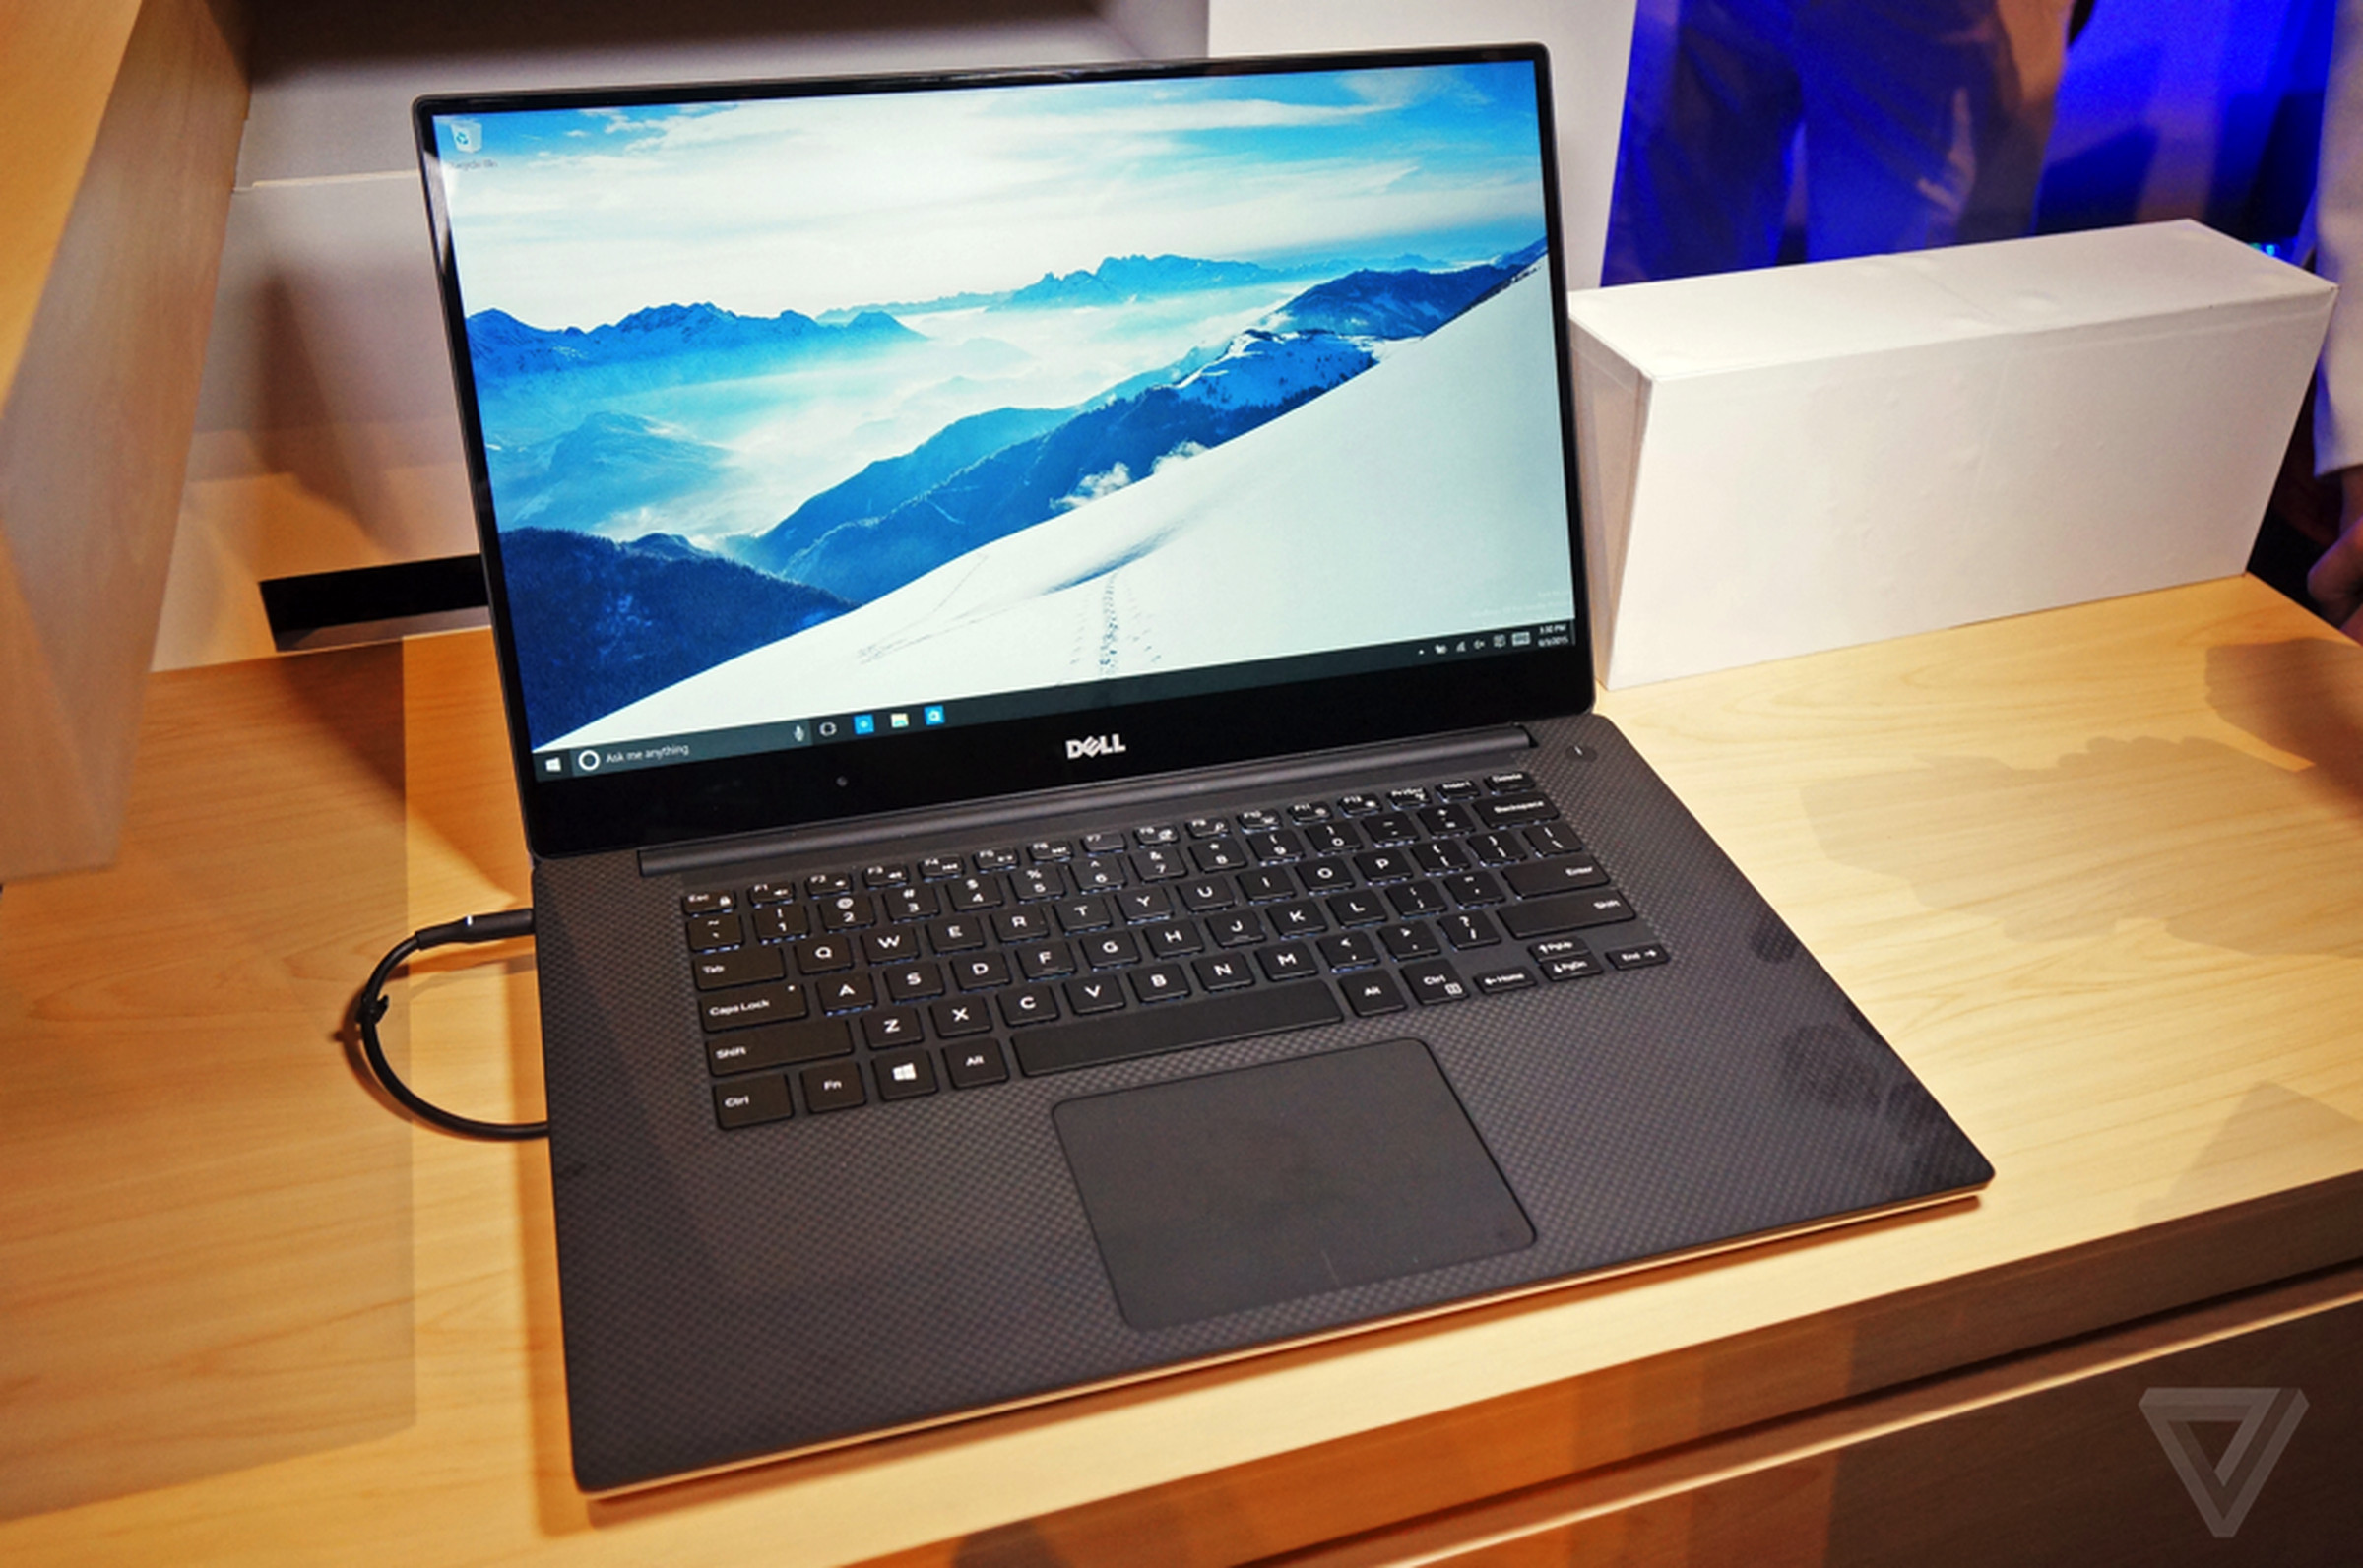 Dell XPS 15 with Infinity Display at Computex 2015